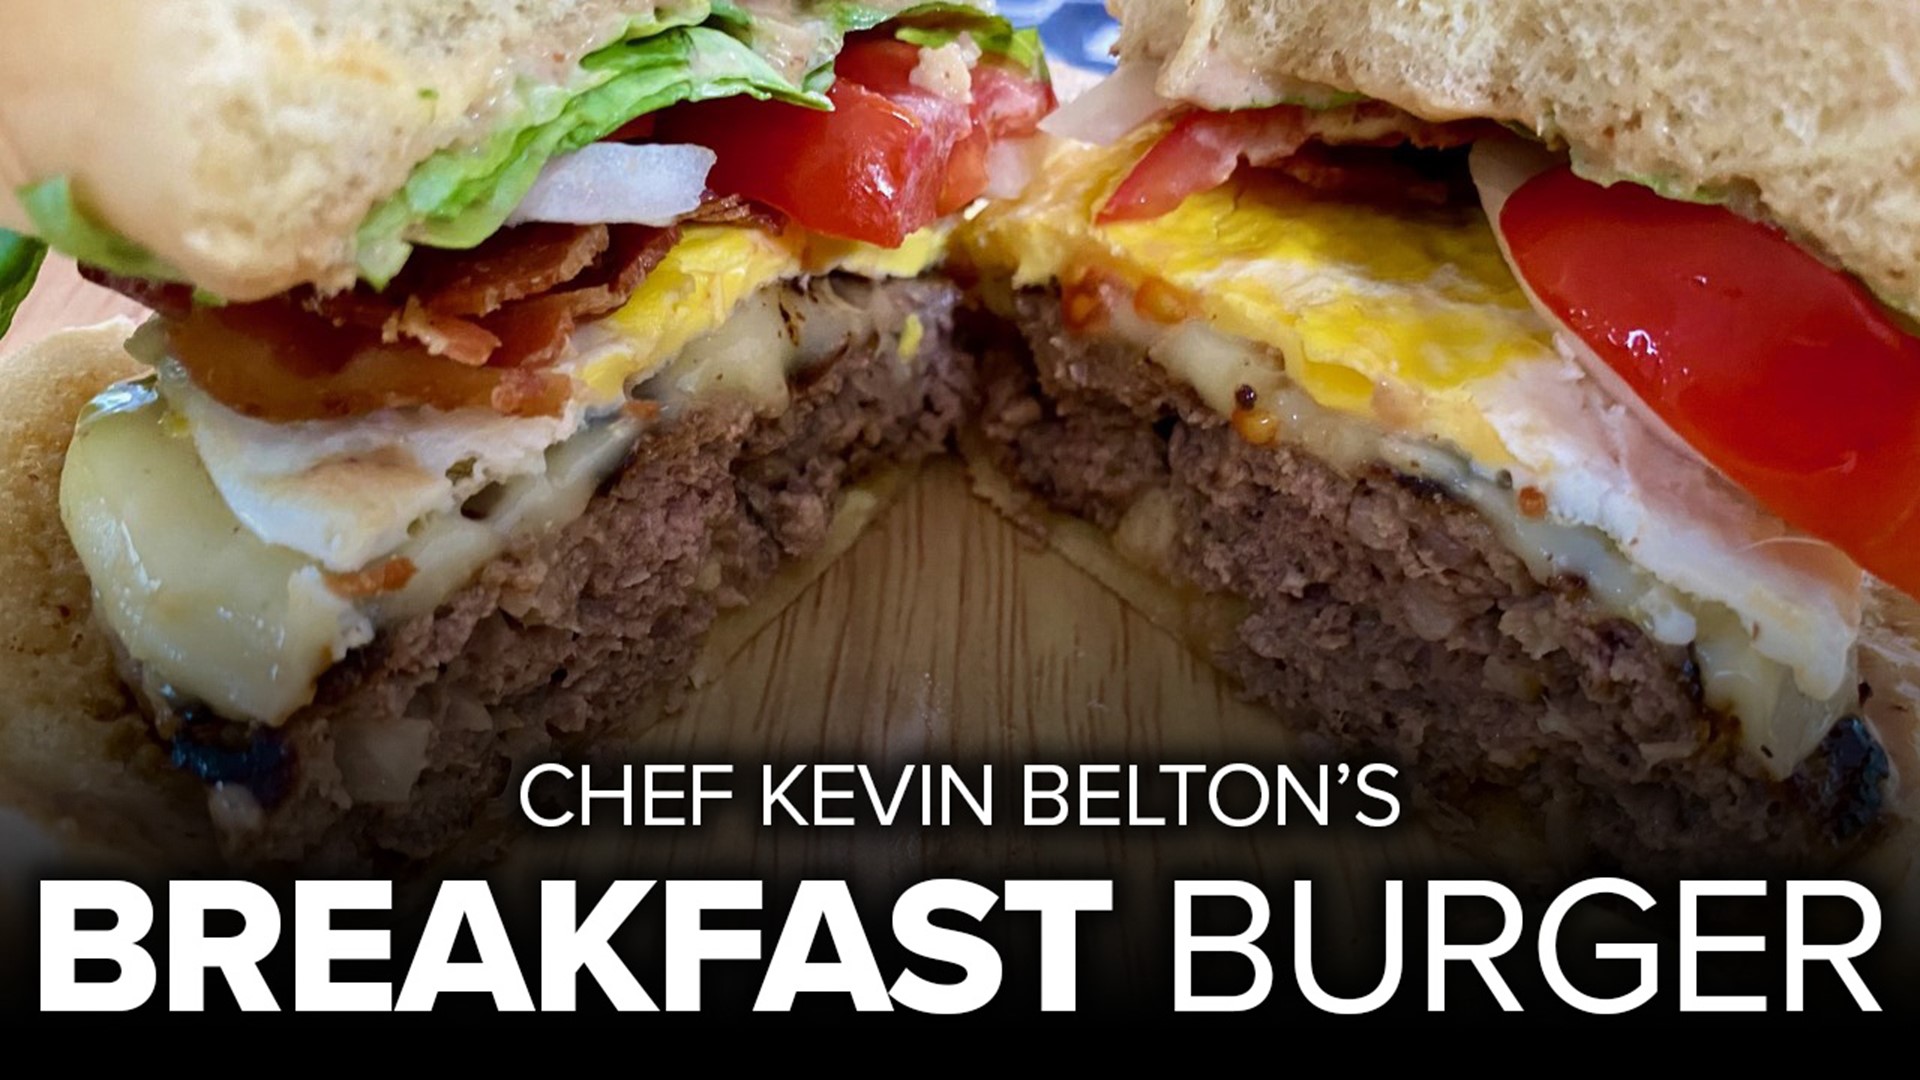 I love a good burger! Why not have one for breakfast?